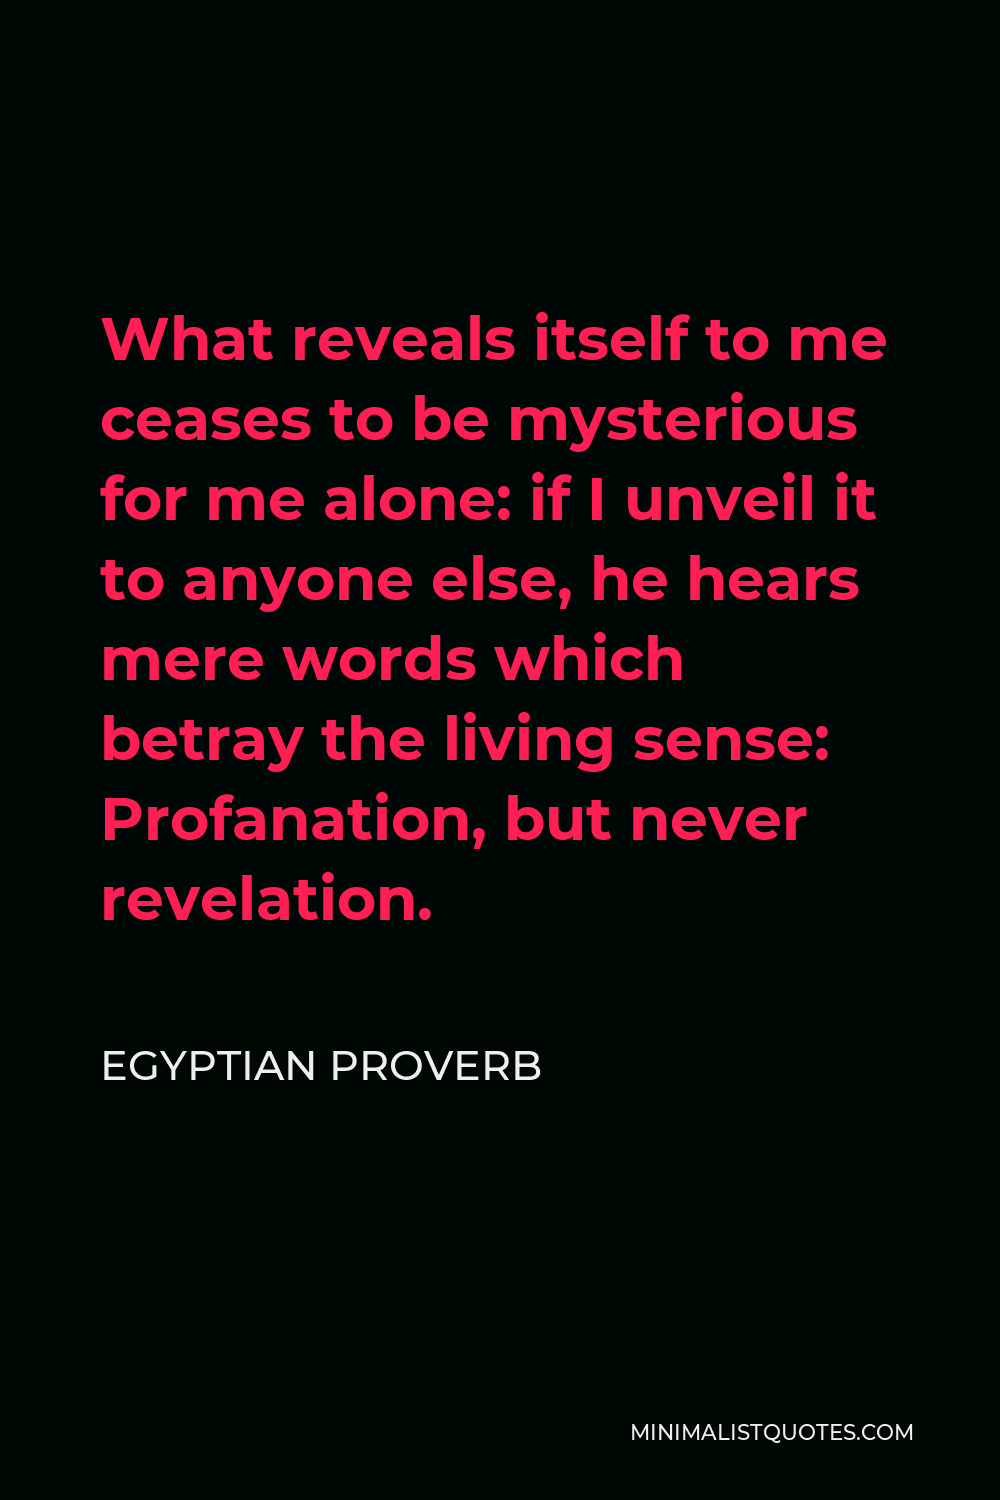 Egyptian Proverb Quote - What reveals itself to me ceases to be mysterious for me alone: if I unveil it to anyone else, he hears mere words which betray the living sense: Profanation, but never revelation.